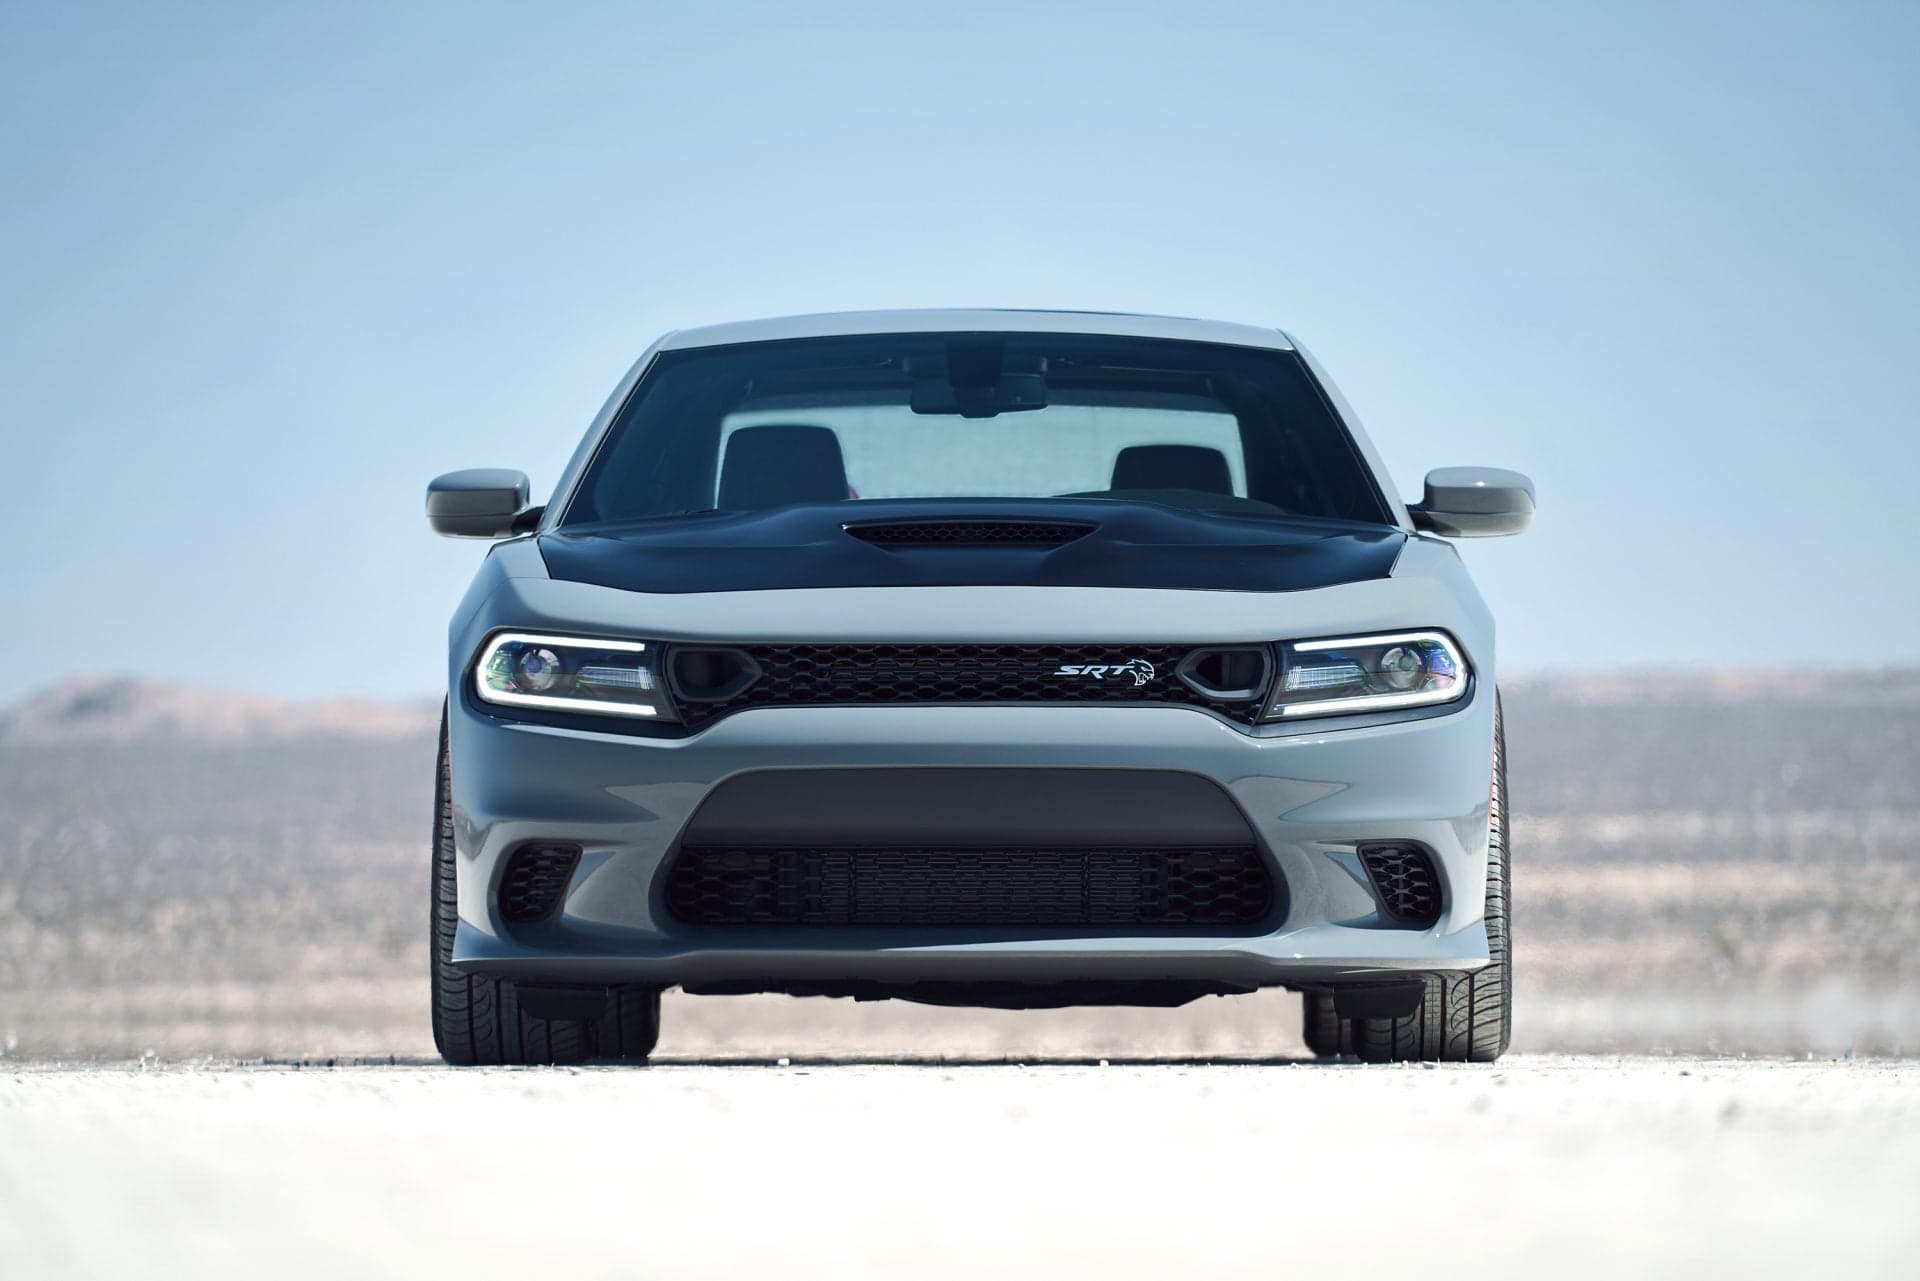 Dodge Will Unveil the New 2021 SRT Lineup This Week With 8,950 Horsepower